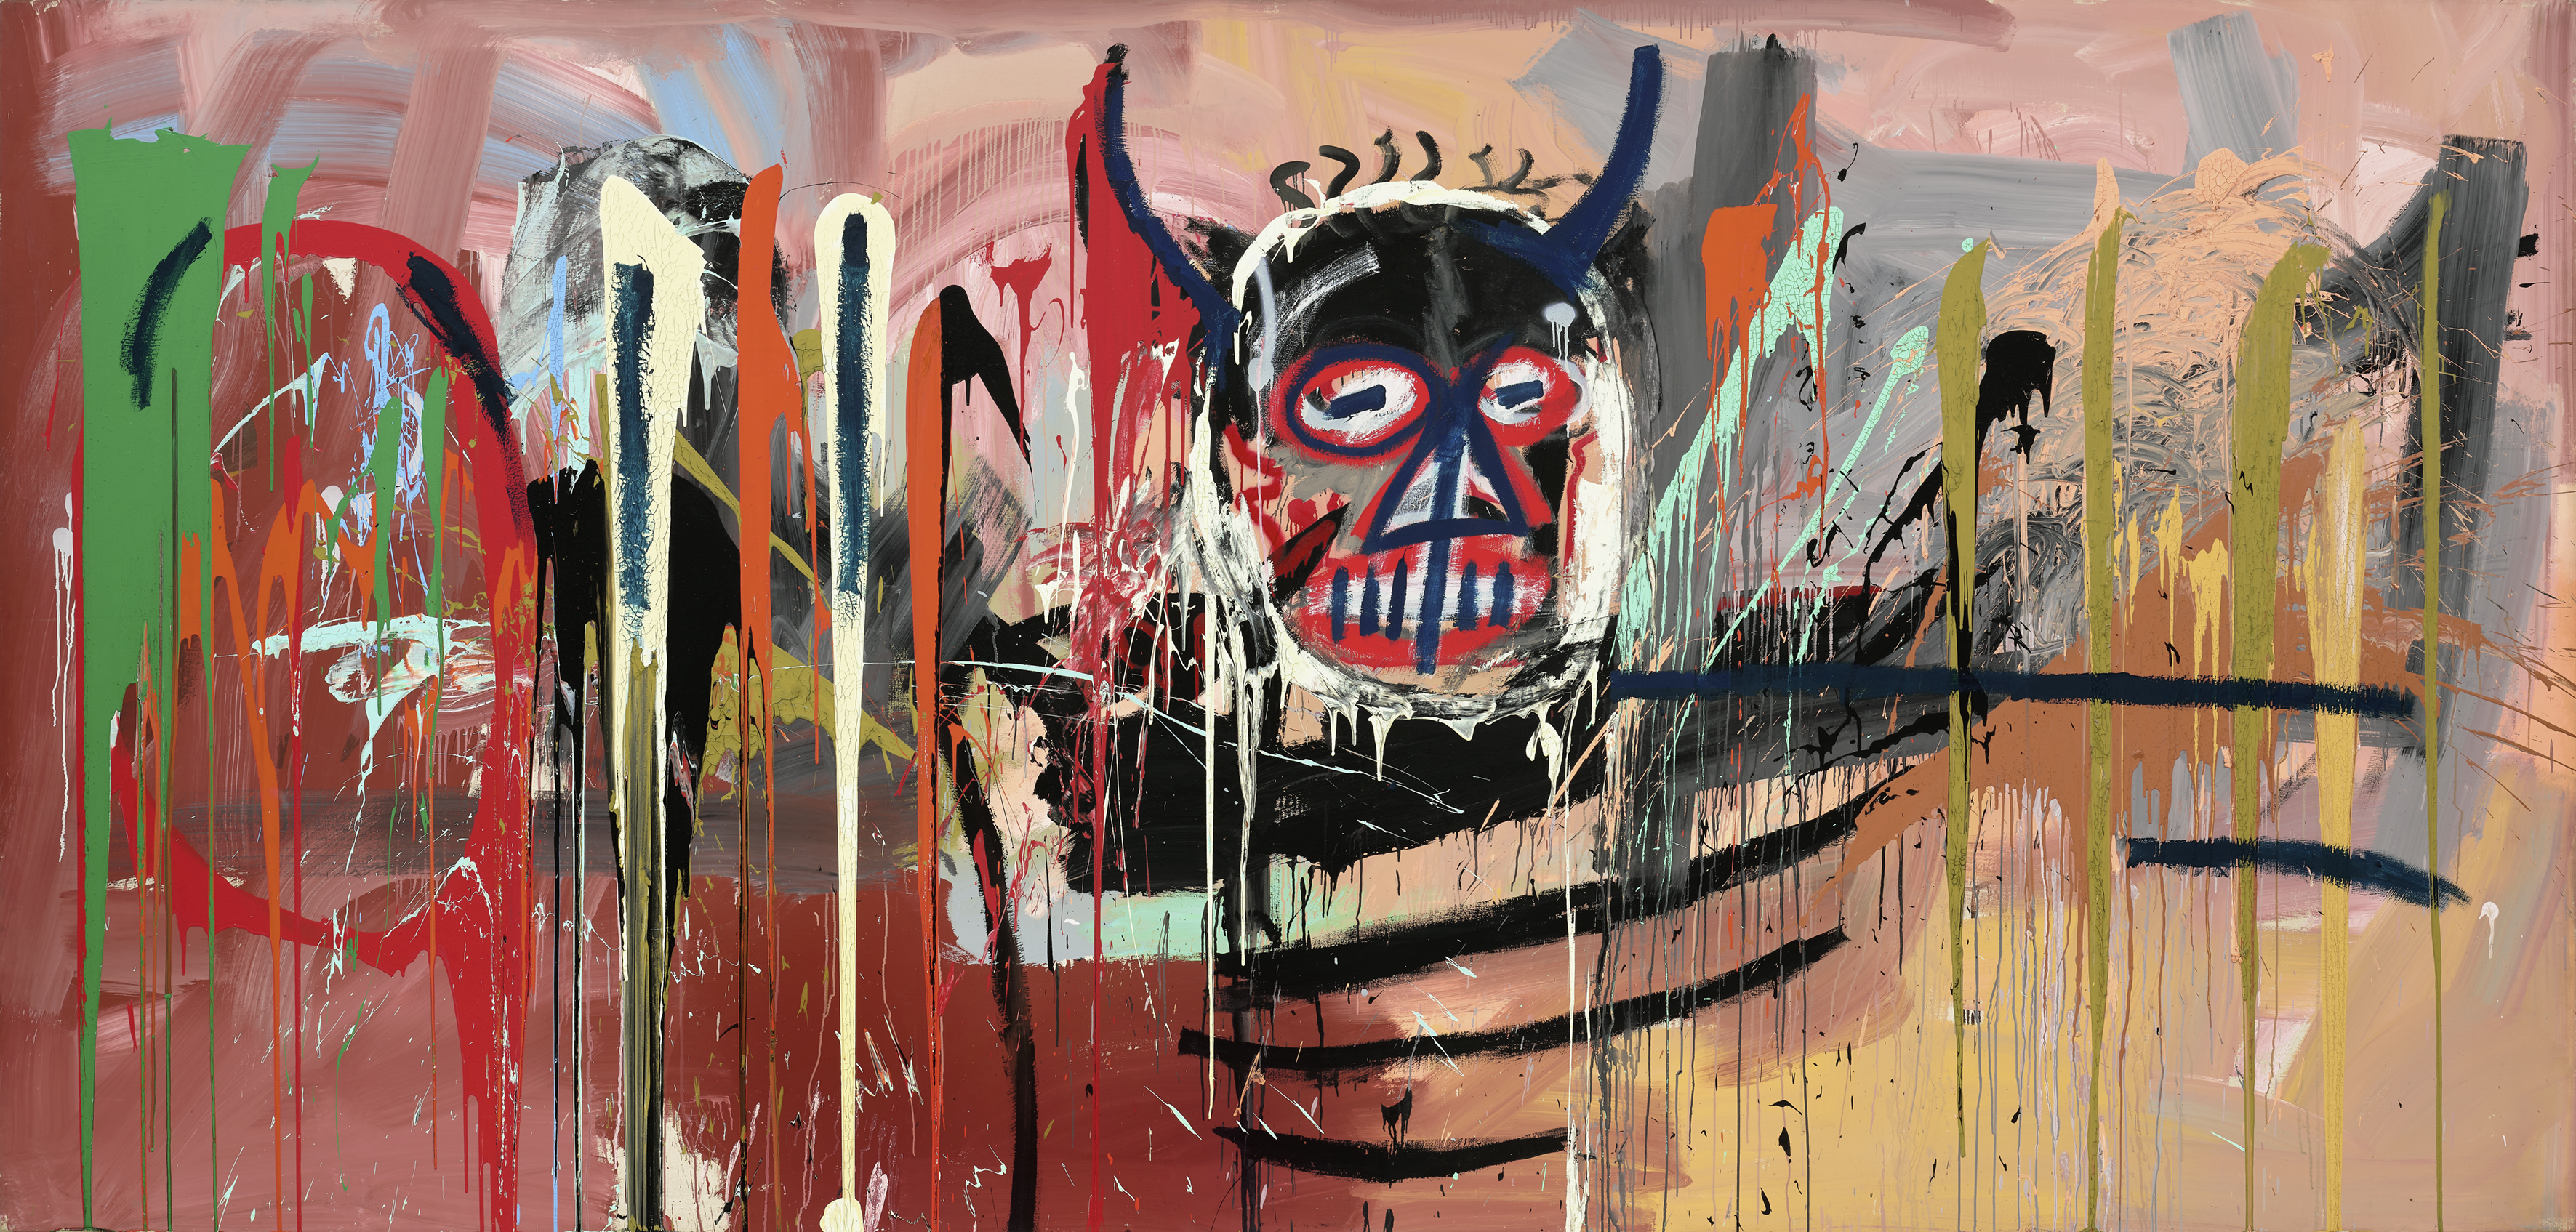 JEAN-MICHEL BASQUIAT, UNTITLED (DEVIL), 1982 Acrylic and spray paint on canvas, 238.7 x 500.4 cm Private Collection © Estate of Jean-Michel Basquiat. Licensed by Artestar, New York Photo: © 2023 Phillips Auctioneers LLC. All Rights Reserved